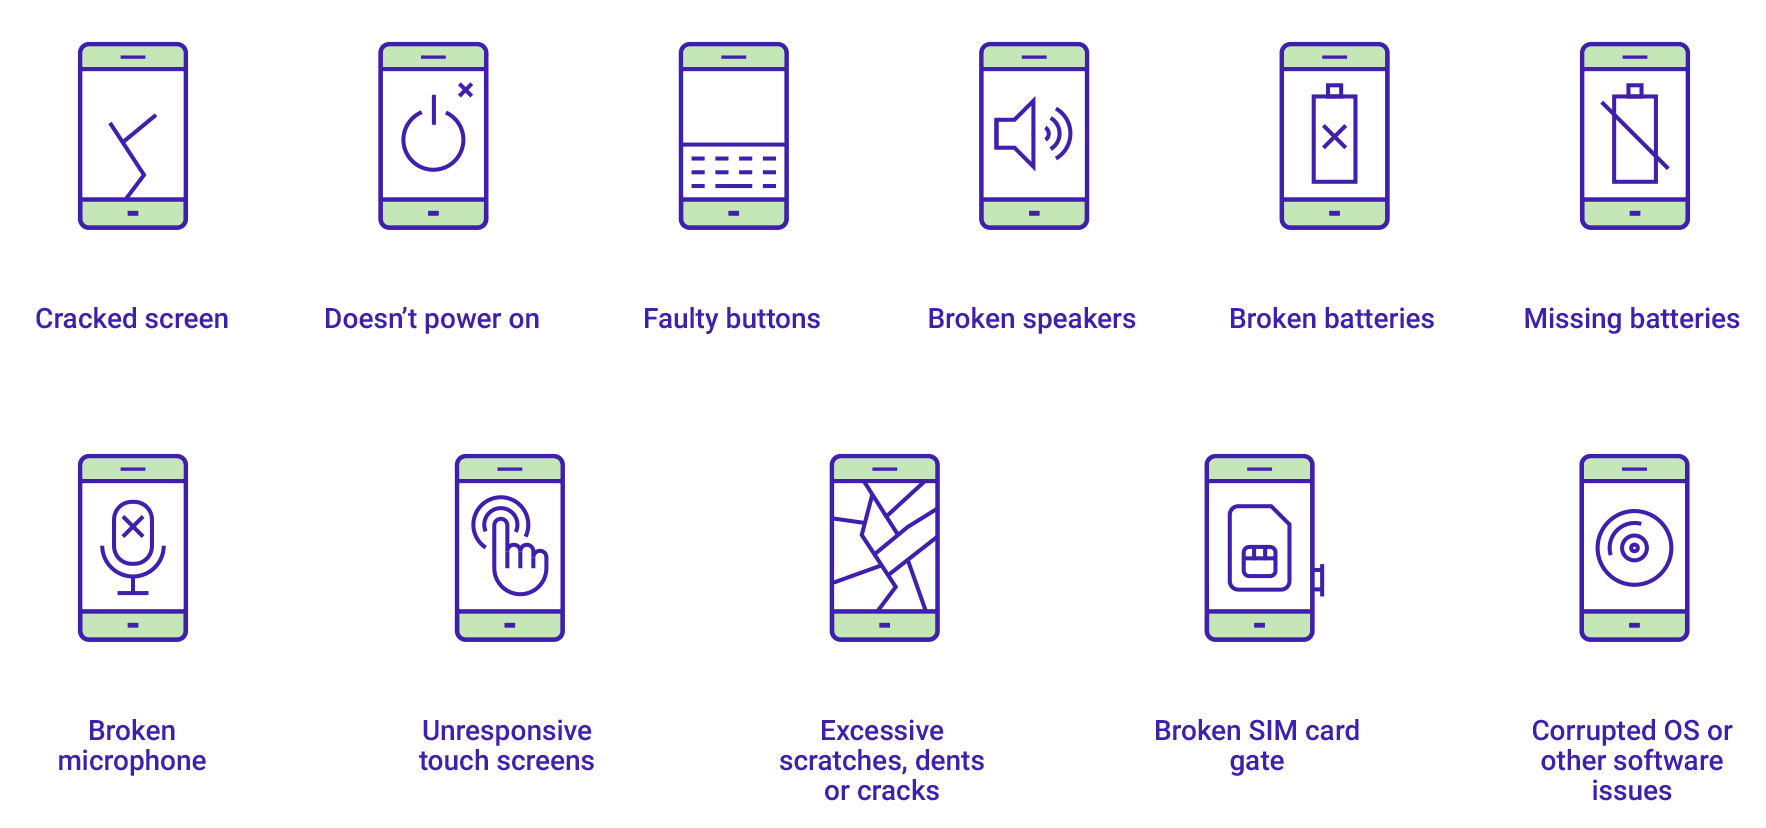 Broken phones - cracked screen, doesn’t power on, faulty buttons, broken speakers, broken batteries, missing batteries, broken microphone, unresponsive touch screens, excessive scratches, dents or cracks, broken SIM card gate, corrupted OS or other software issues